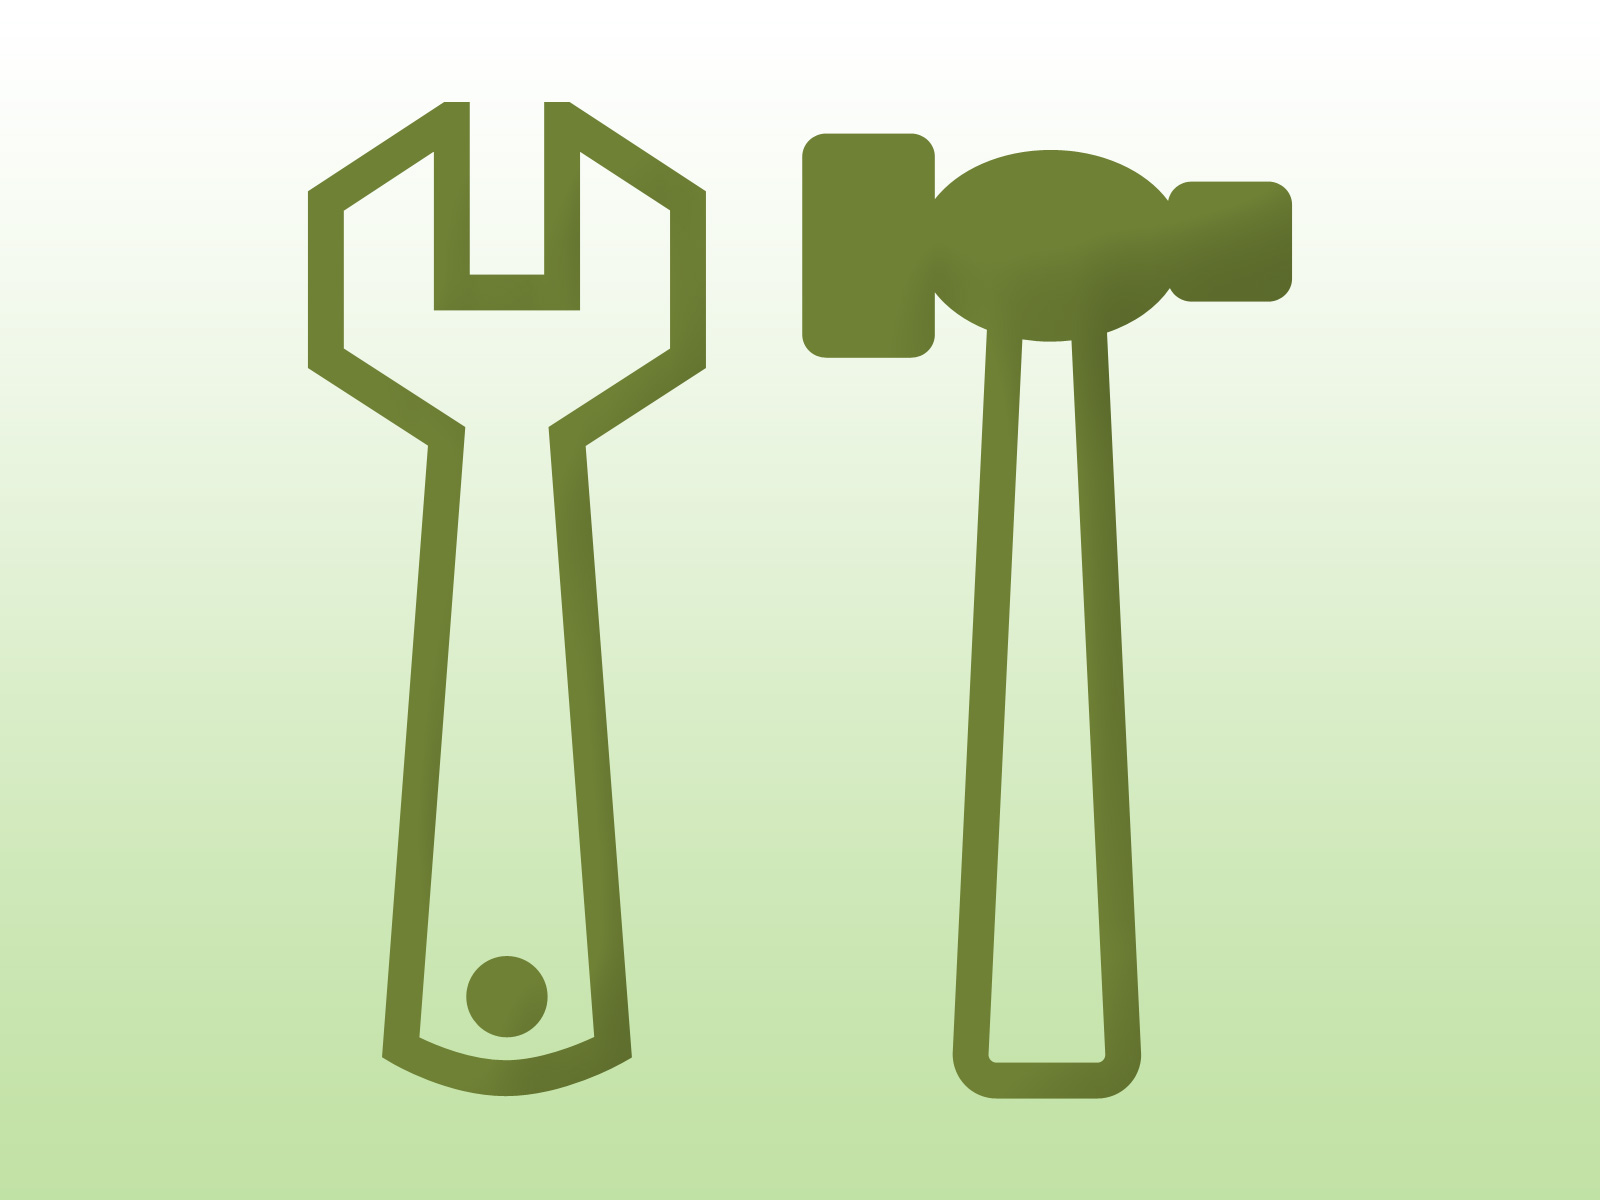 Tools icon on green